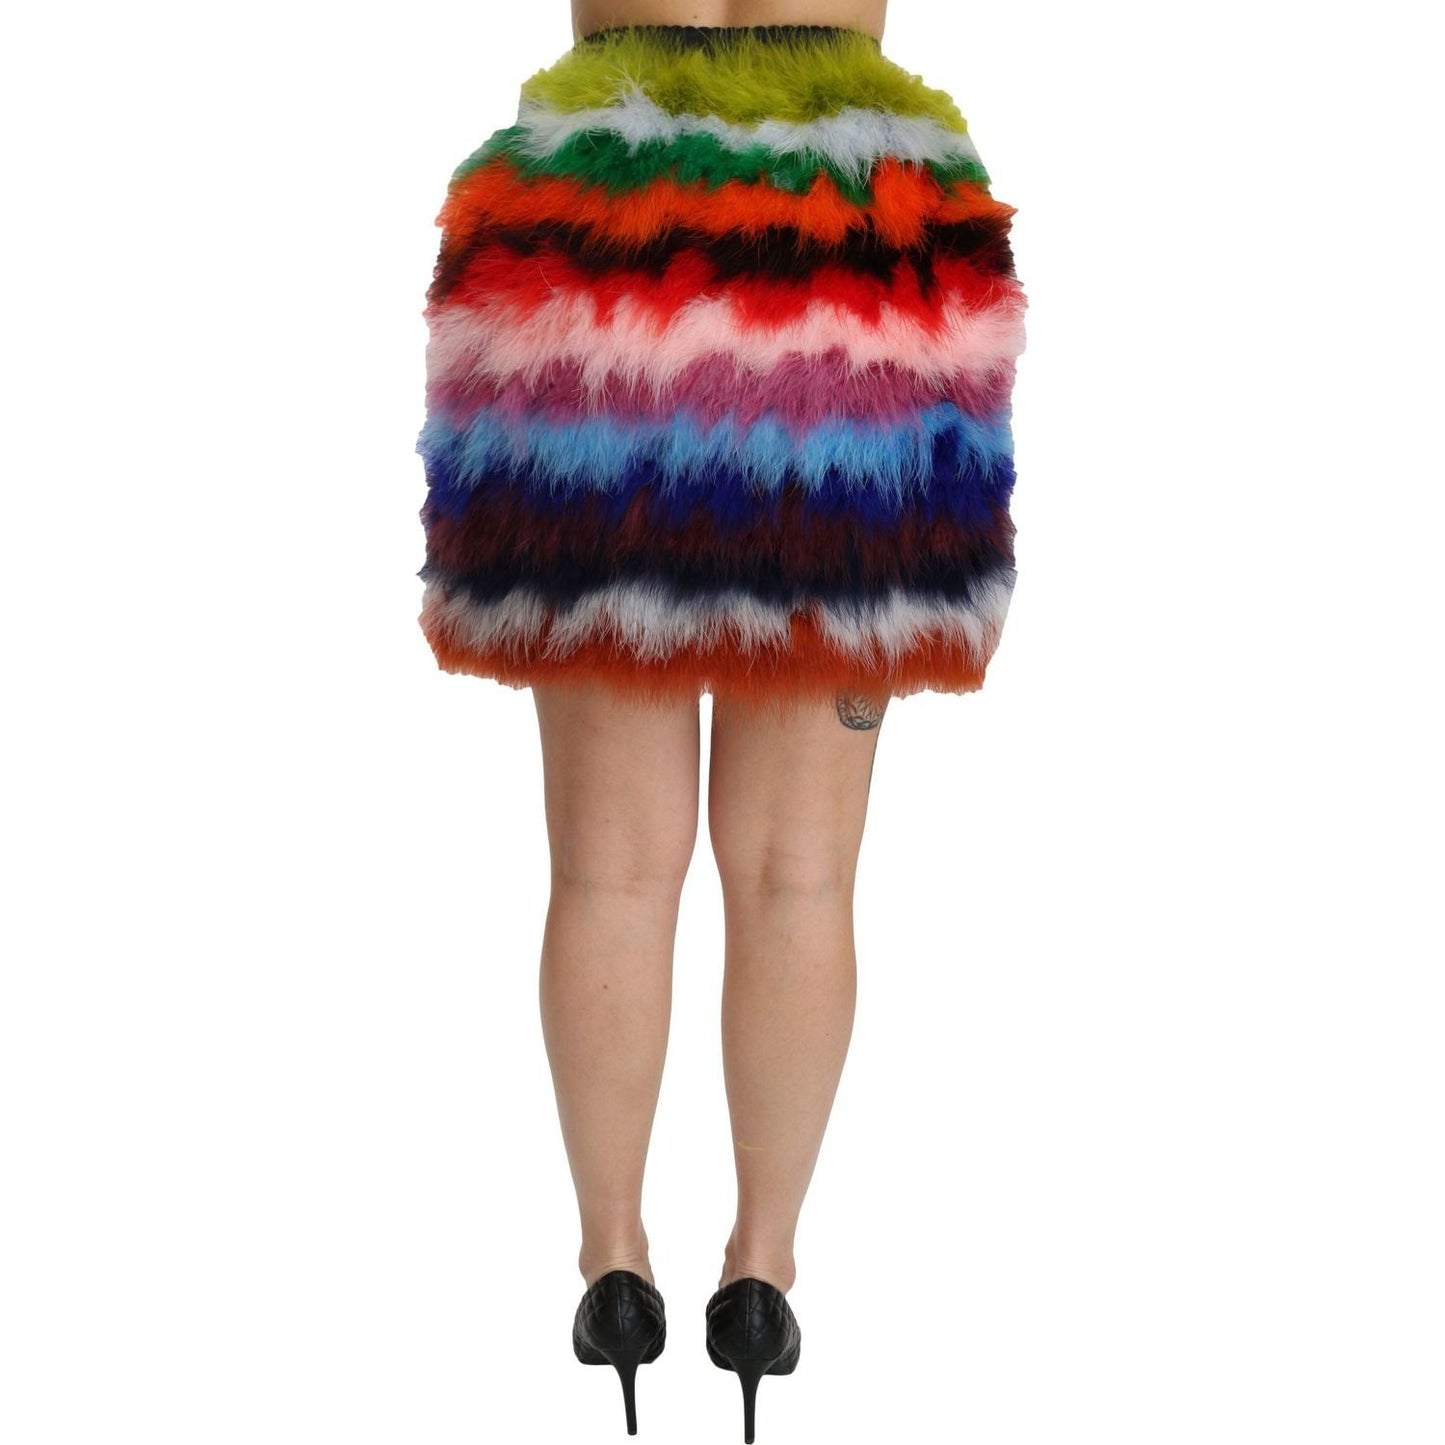 Dolce & Gabbana Chic Feather Embellished High Waist Skirt red-blue-high-waist-mini-feather-skirt